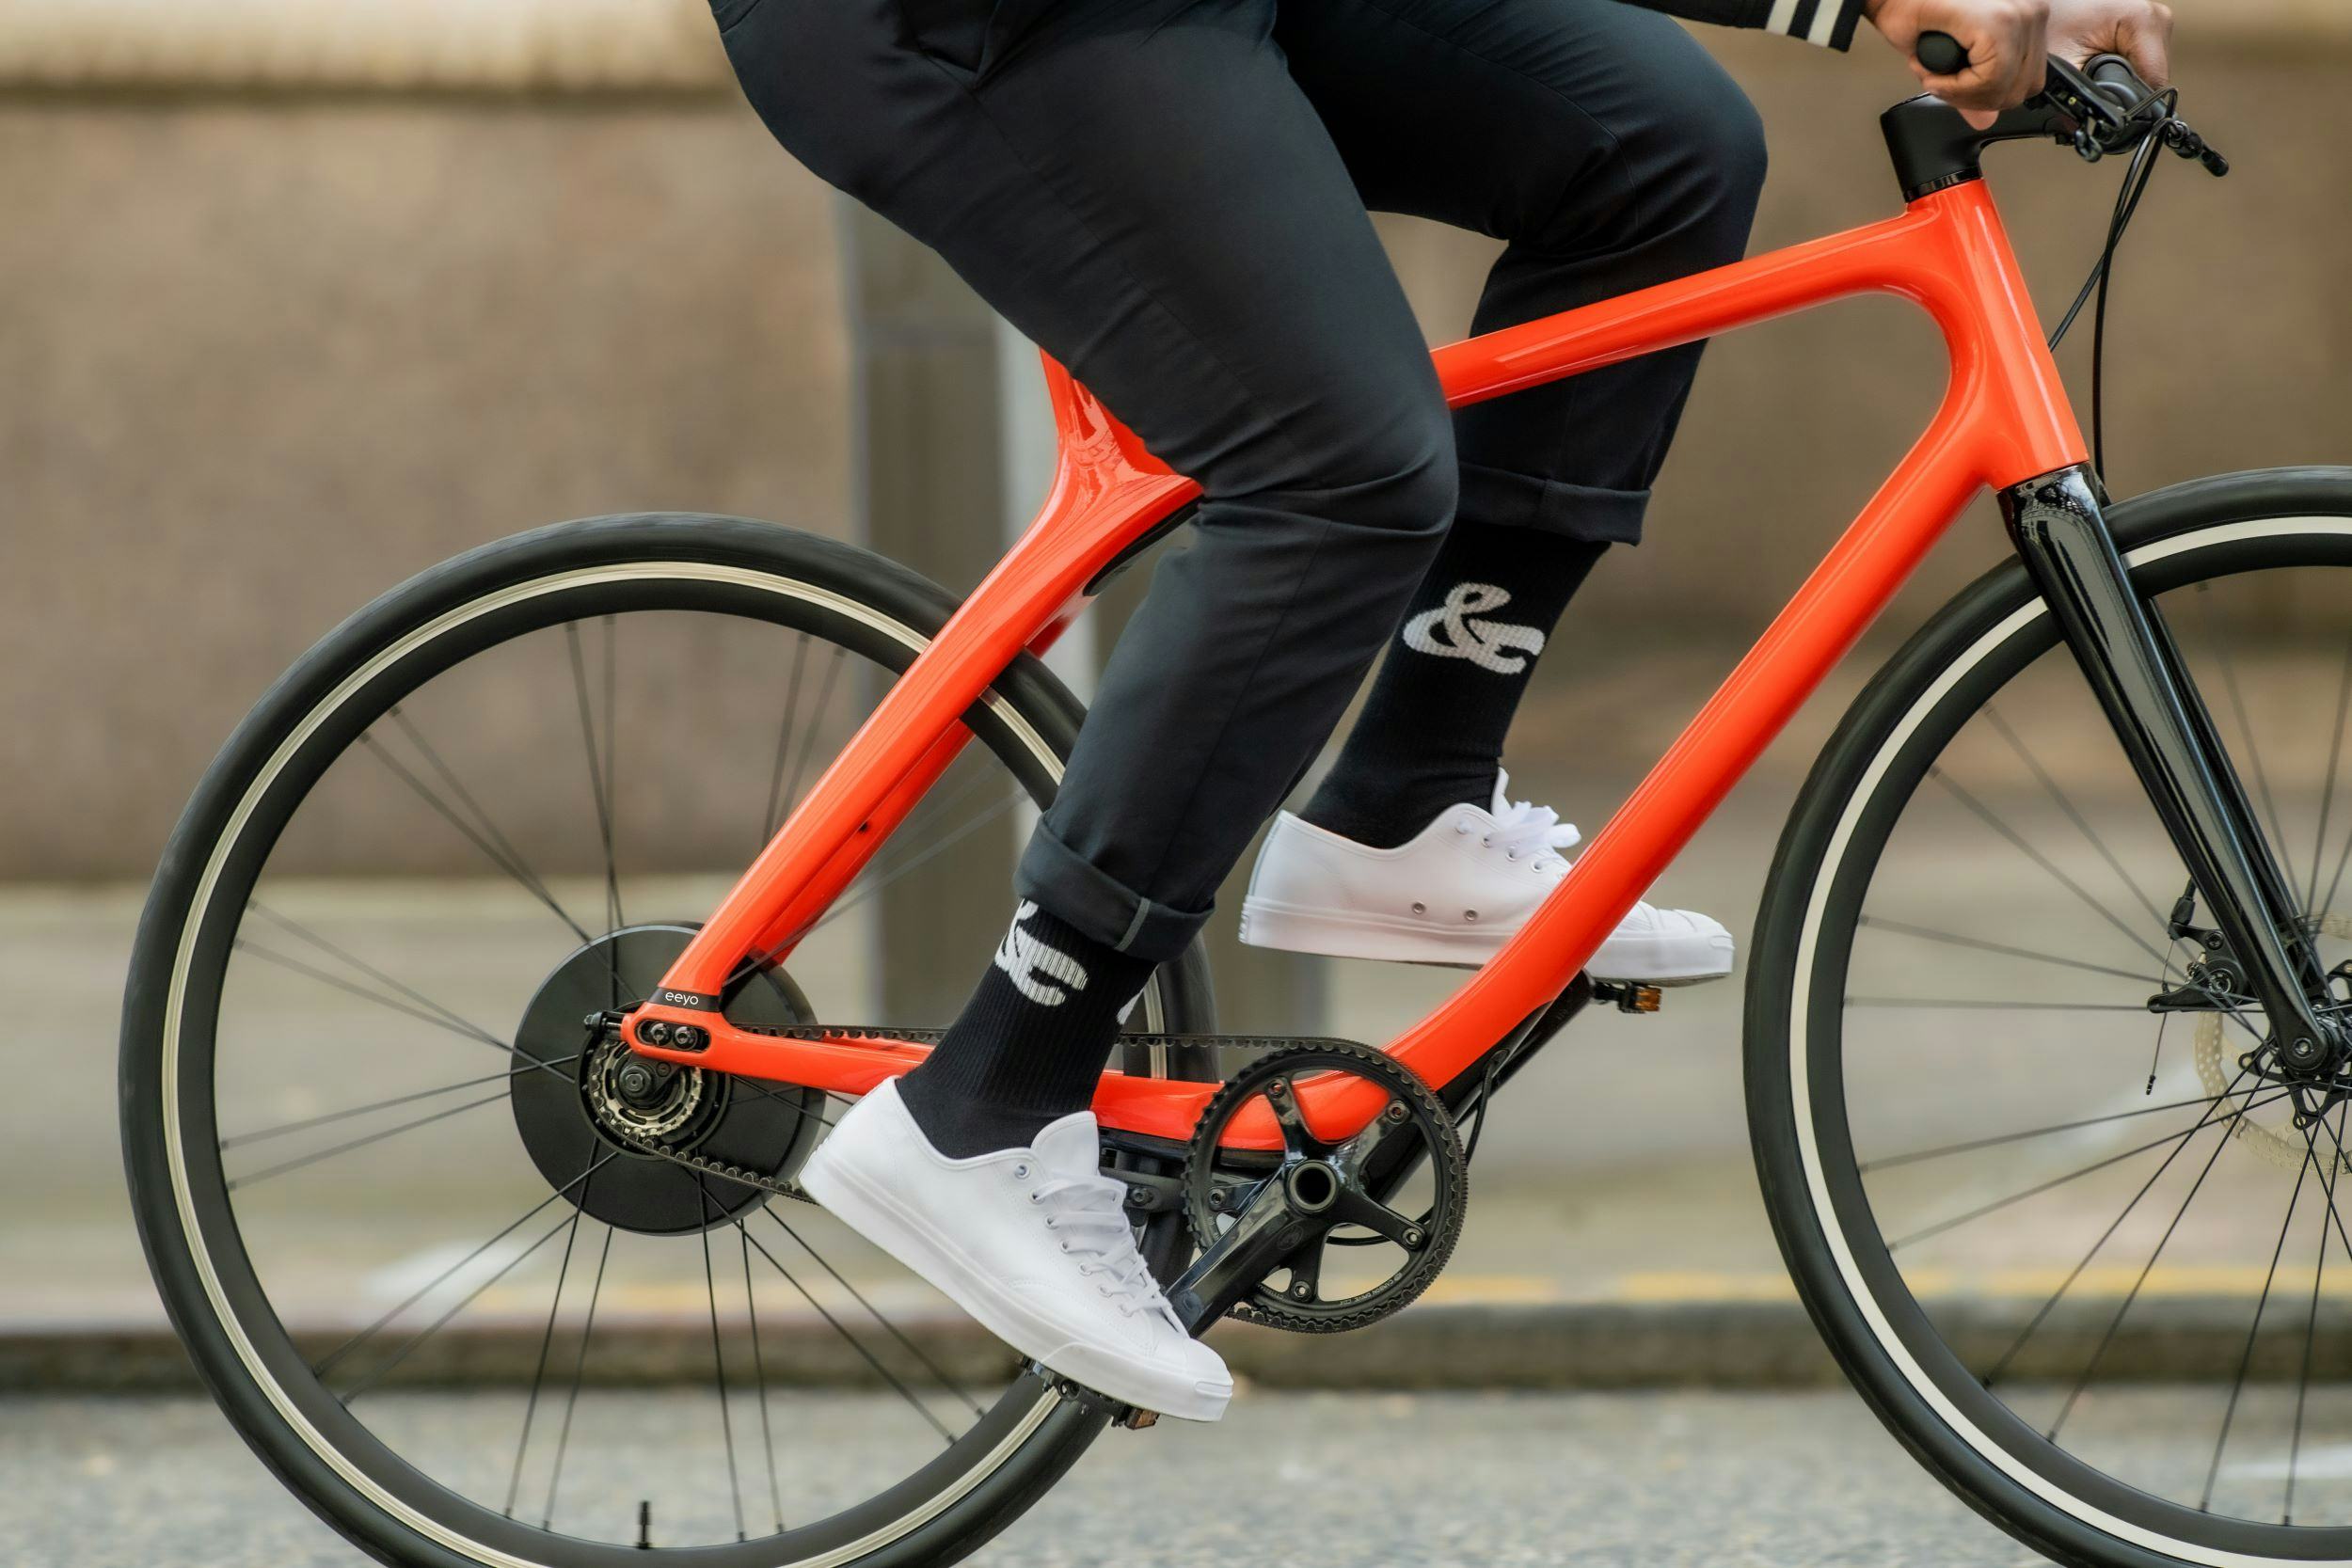 The Eeyo 1 e-bikes, which are about to enter the European market have the Eeyo Smartwheel, an integrated hub system which houses the motor, battery and other electronics. – Photo Gogoro 